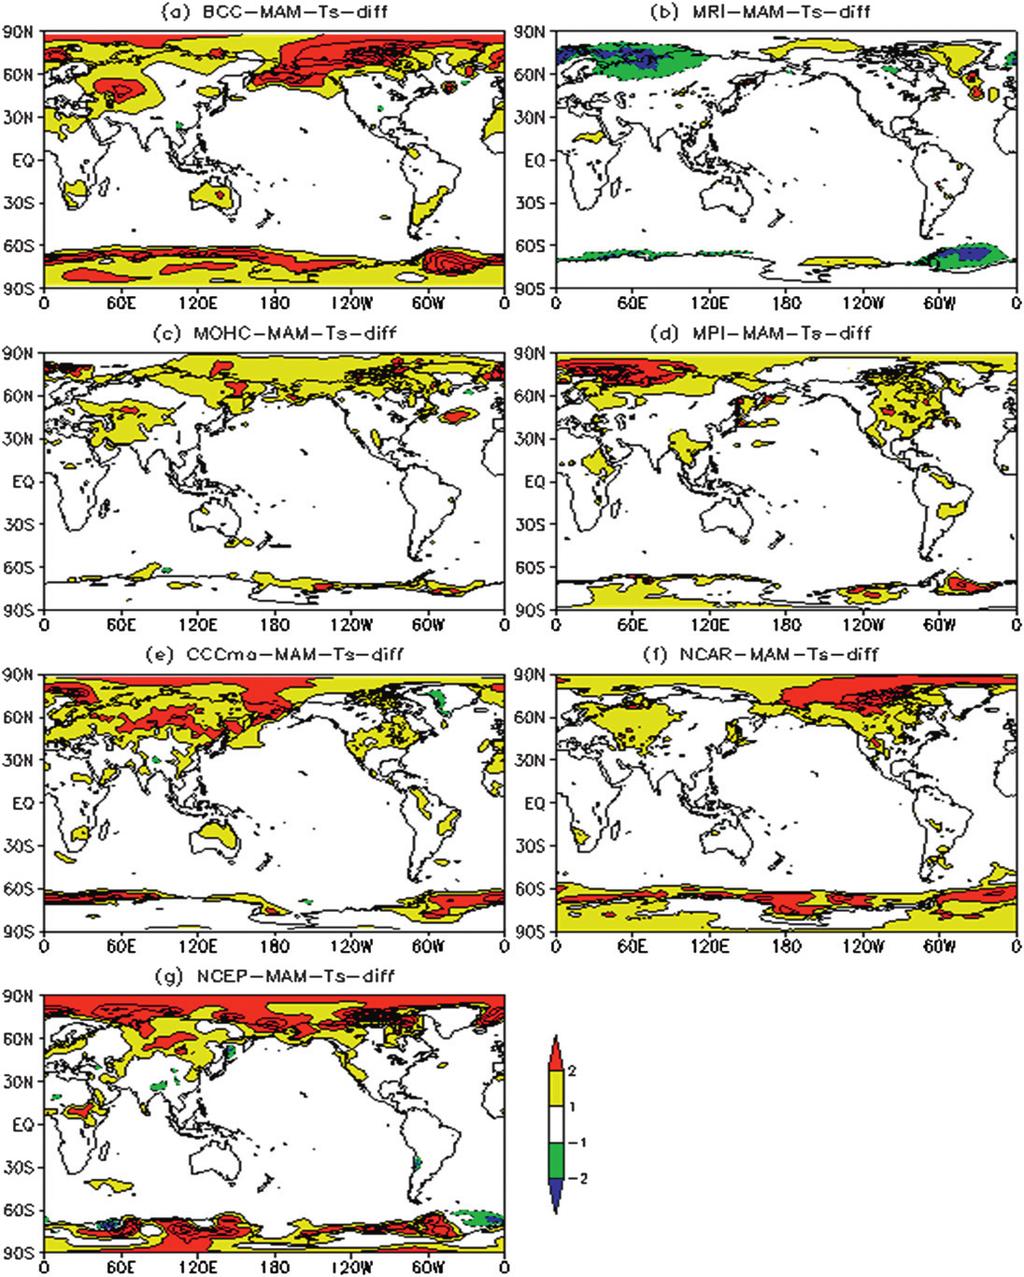 7470 JOURNAL OF CLIMATE VOLUME 26 FIG. 3.